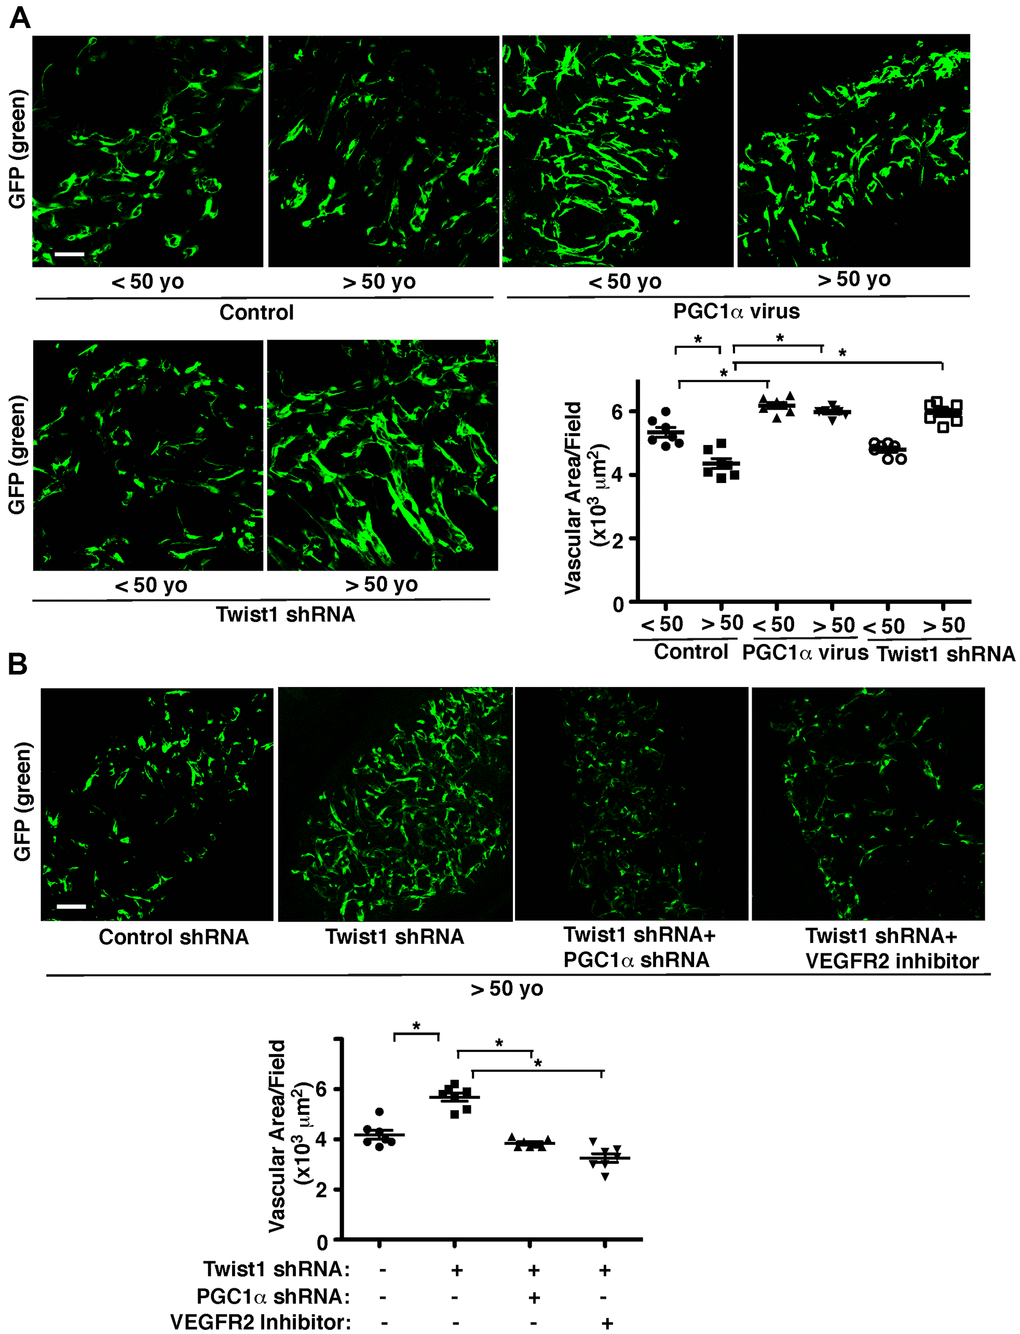 Twist1-PGC1α signaling mediates age-dependent decline in vascular formation in the subcutaneously implanted gel. (A) IF micrographs of fibrin gel supplemented with GFP-labeled young (50 years old) human adipose ECs treated with lentivirus overexpressing PGC1α or Twist1 shRNA and subcutaneously implanted on NSG mice for 7 days. As a control, young vs. aged human adipose ECs were treated with lentivirus encoding control shRNA with irrelevant sequences or vector alone. Scale bar, 100 μm. Graph showing vascular area in the gel (n=7, mean ± s.e.m., *, pB) IF micrographs of fibrin gel supplemented with GFP-labeled aged human adipose ECs treated with lentivirus encoding Twist1 shRNA or in combination with PGC1α shRNA or VEGFR2 inhibitor (SU5416) and subcutaneously implanted on NSG mice for 7 days. As a control, aged human adipose ECs were treated with lentivirus encoding control shRNA with irrelevant sequences or control vehicle. Scale bar, 100 μm. Graph showing vascular area in the gel (n=7, mean ± s.e.m., *, p